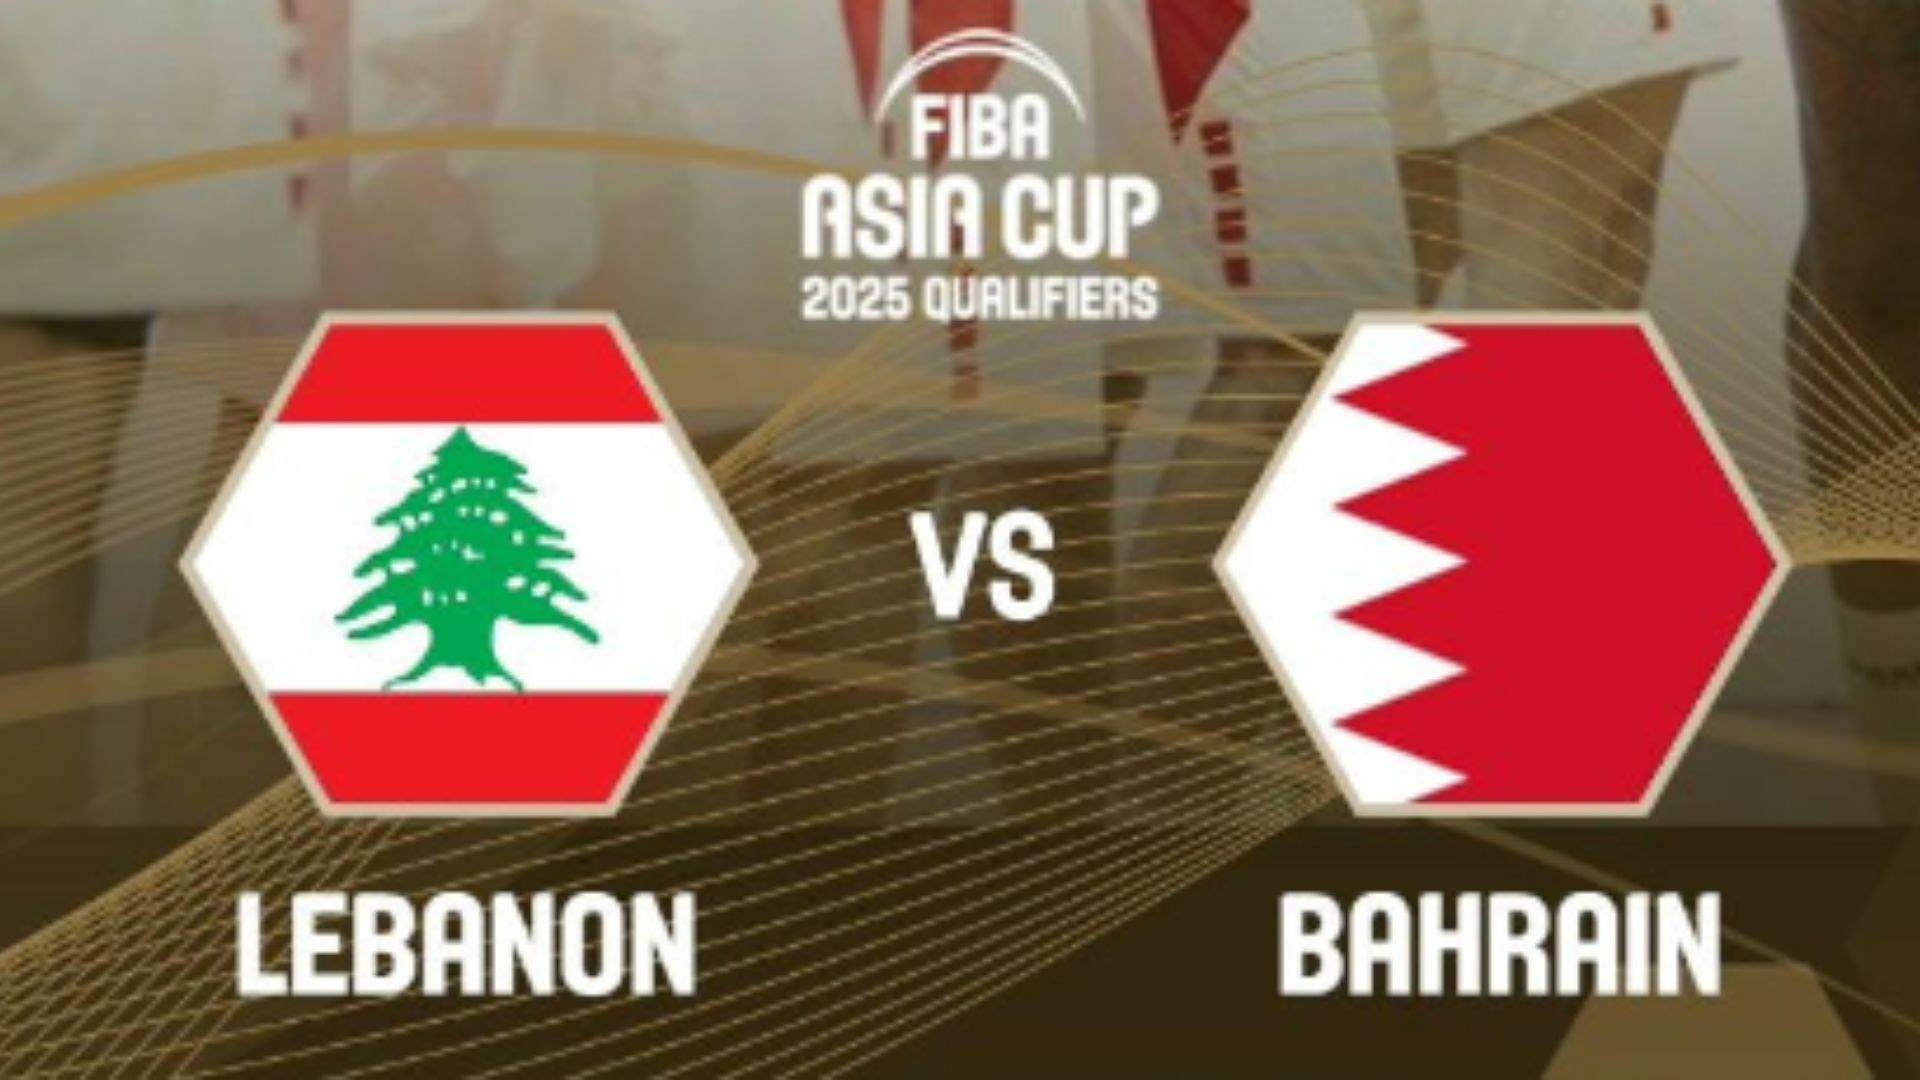 Watch Lebanon vs. Bahrain in the FIBA Asia Cup 2025 Qualifiers at 9:00 PM on lbcgroup.tv or LB2!